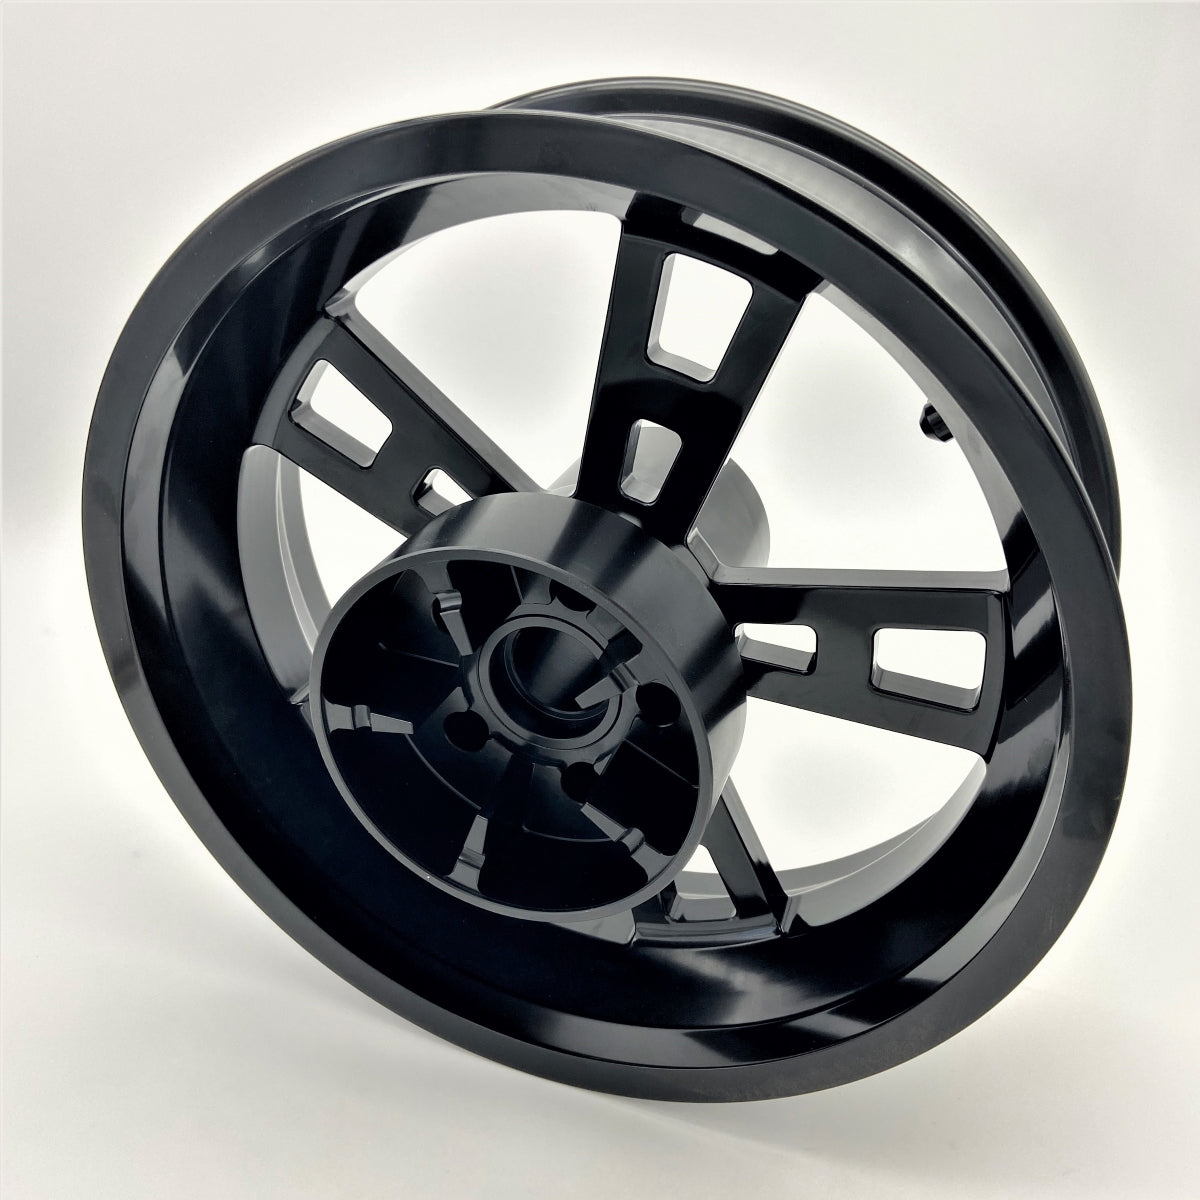 16-inch Forged Rear Wheel for Harley